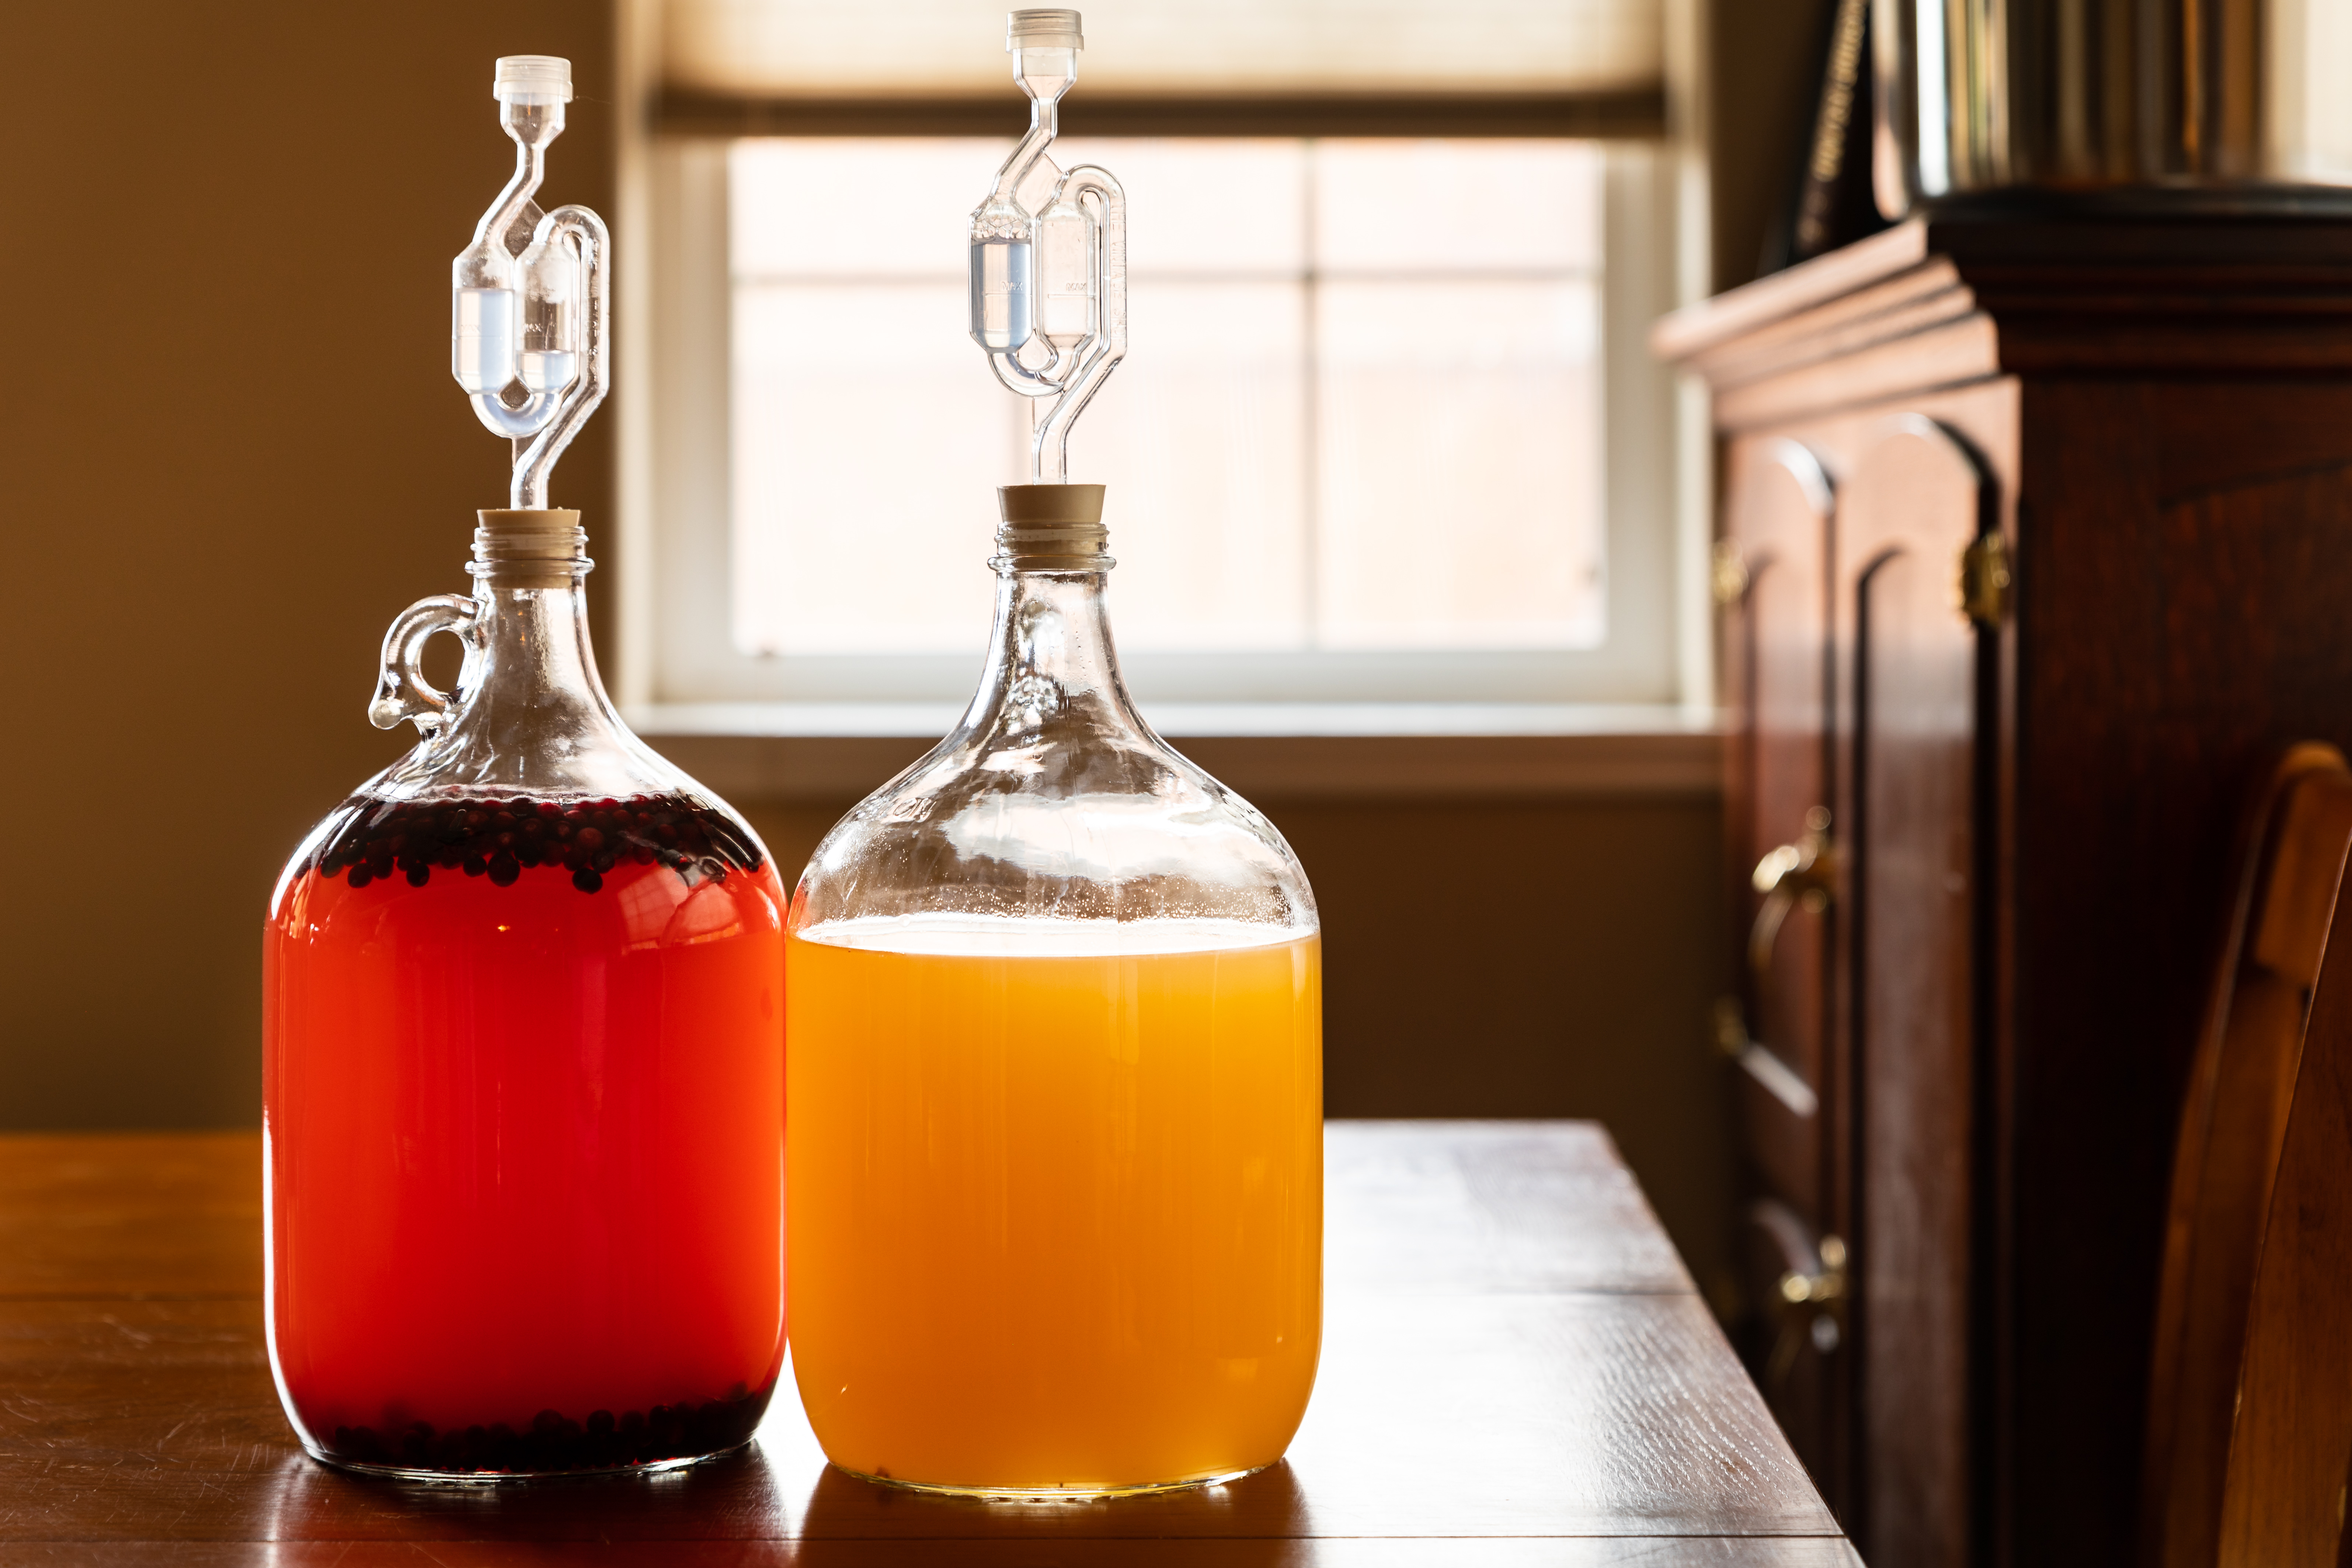 Two big glass jugs contain golden mead and pink mead.